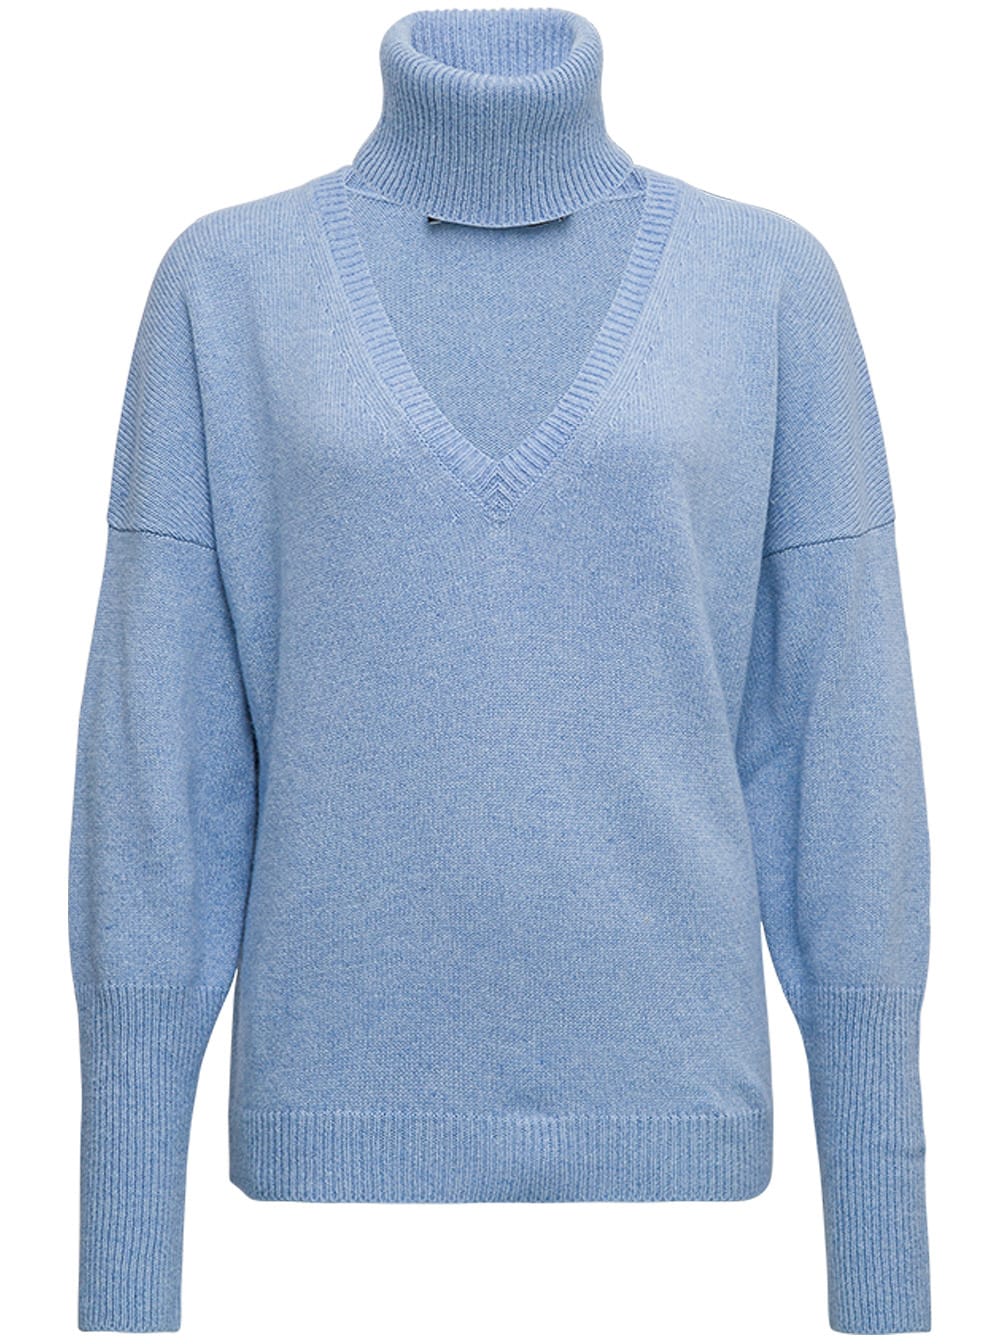 Federica Tosi Light Blue Wool And Cashmere Sweater With High Neck